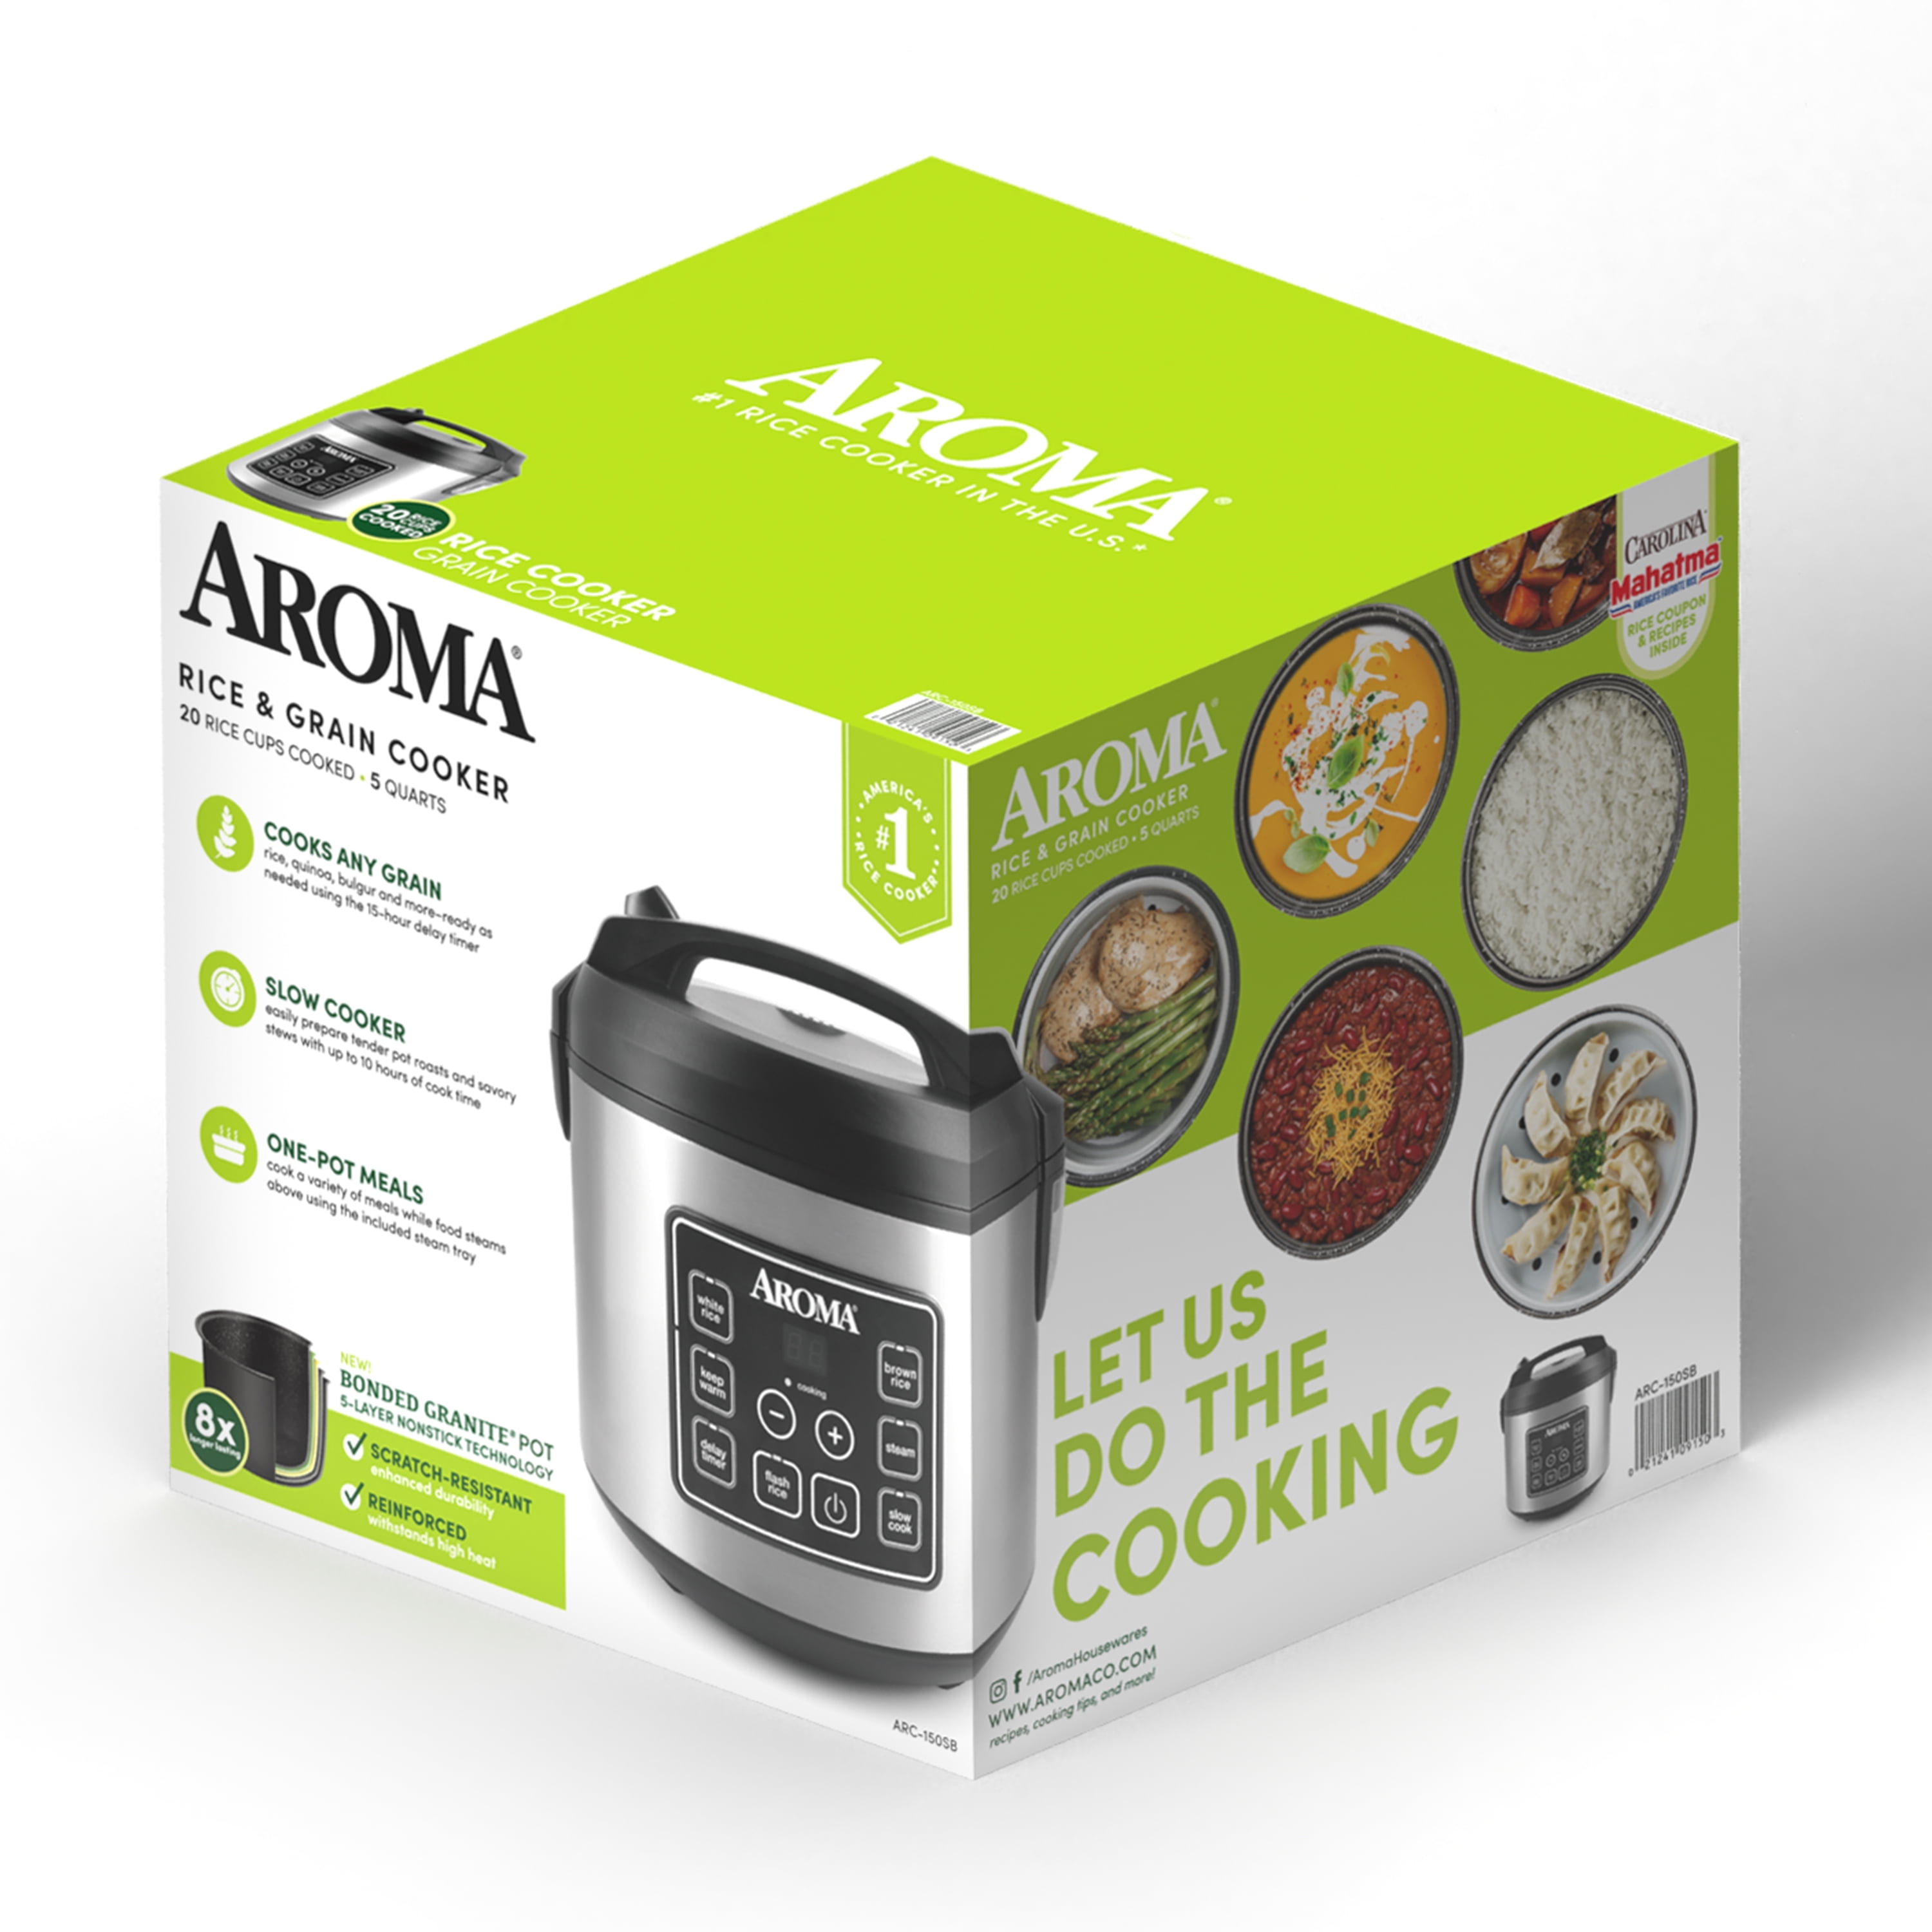 AROMA® Professional 20-Cup (Cooked) / 4Qt. Digital Rice & Grain  Multicooker US